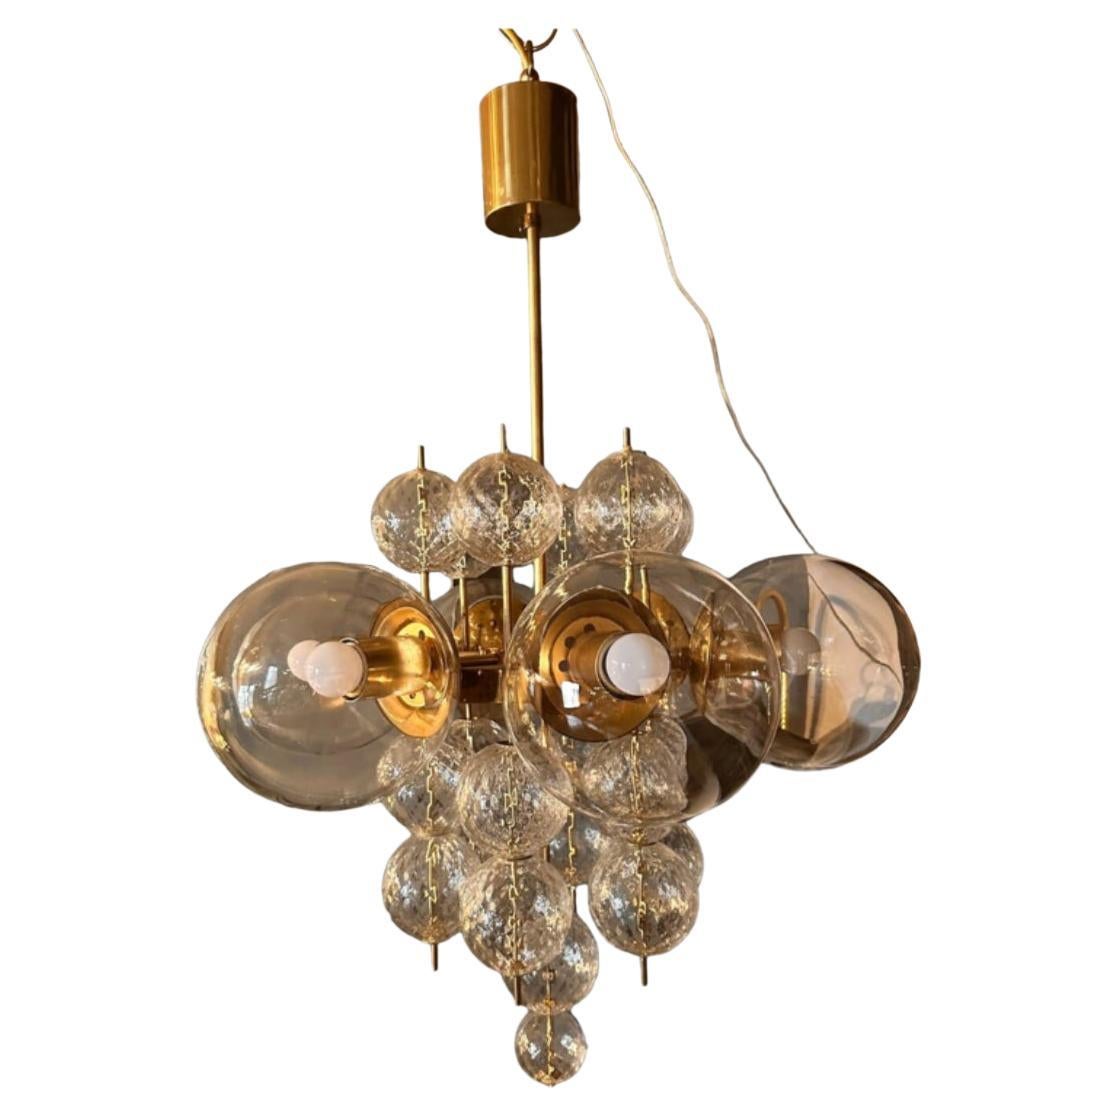 Rare cut glass and gilded brass chandelier circa 1970 For Sale